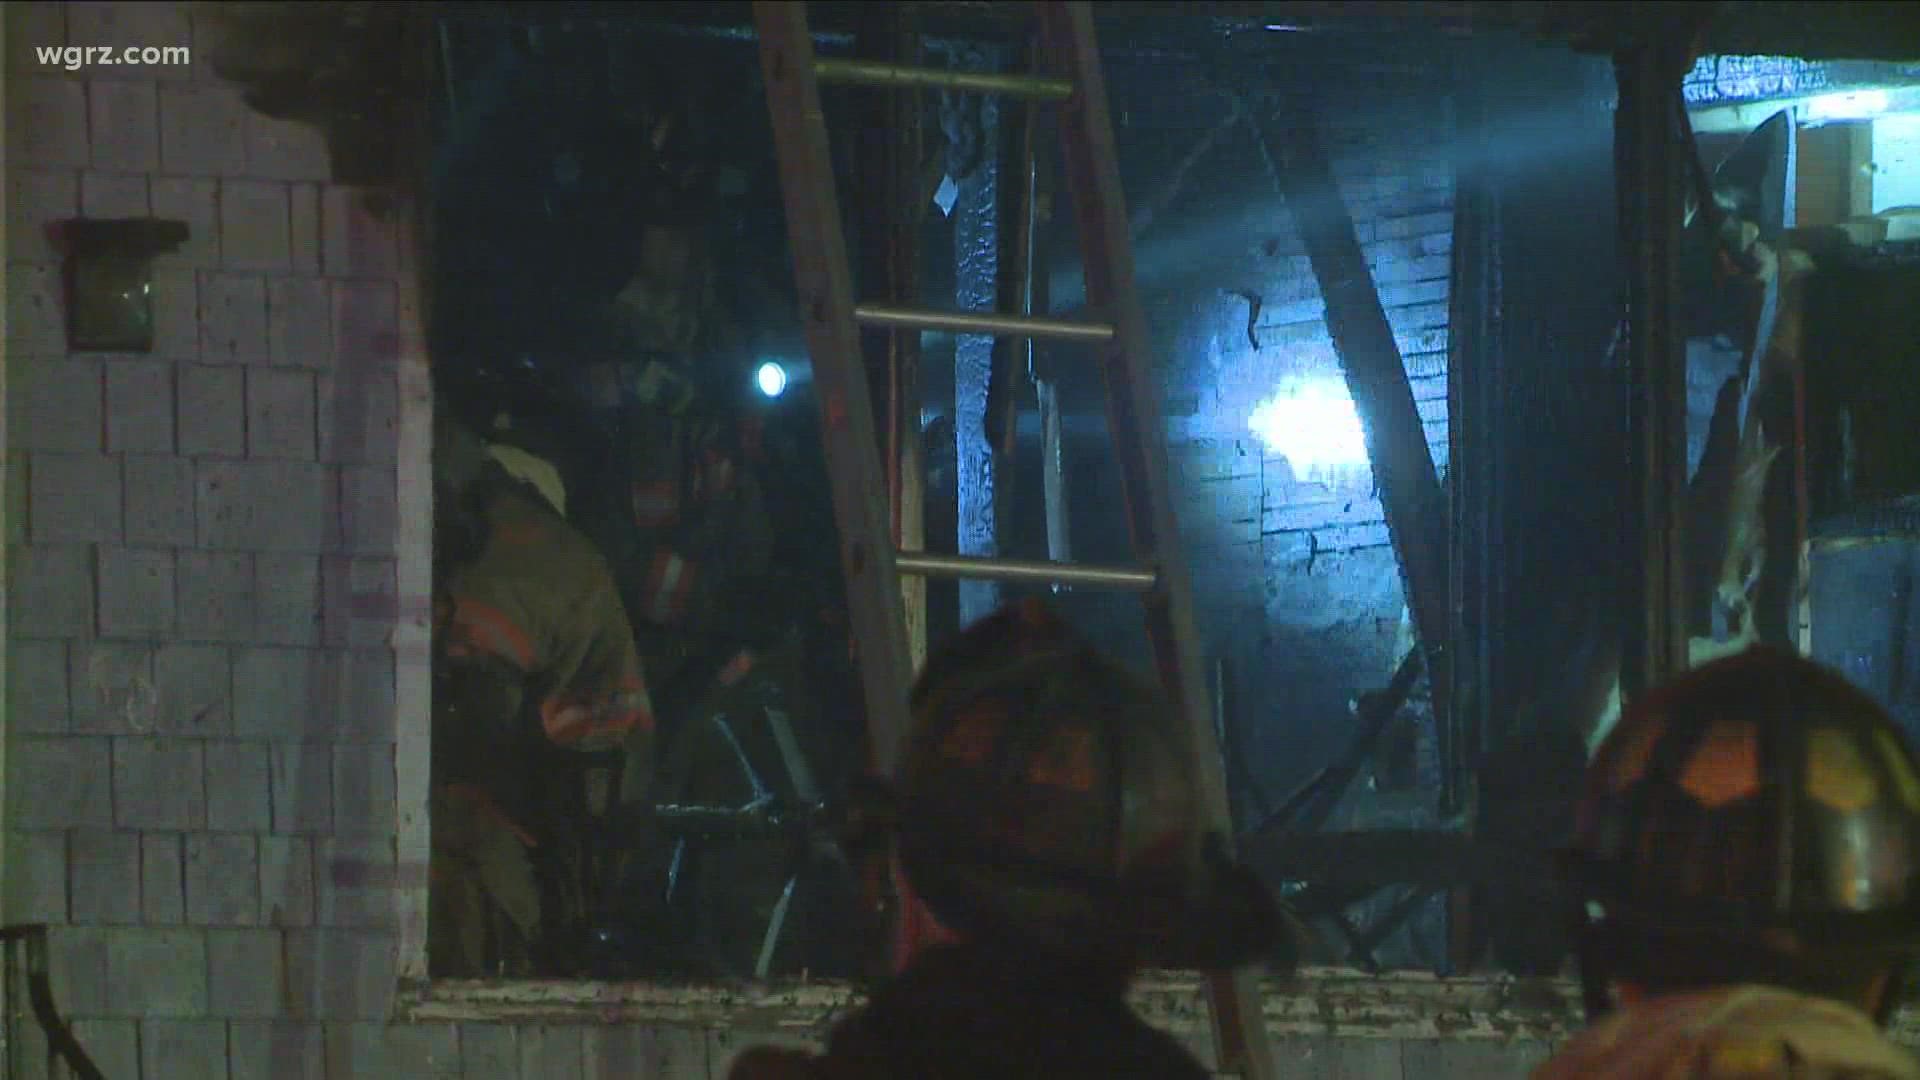 Firefighters were called to the scene of a house fire late Monday night near the Buffalo Cheektowaga border.